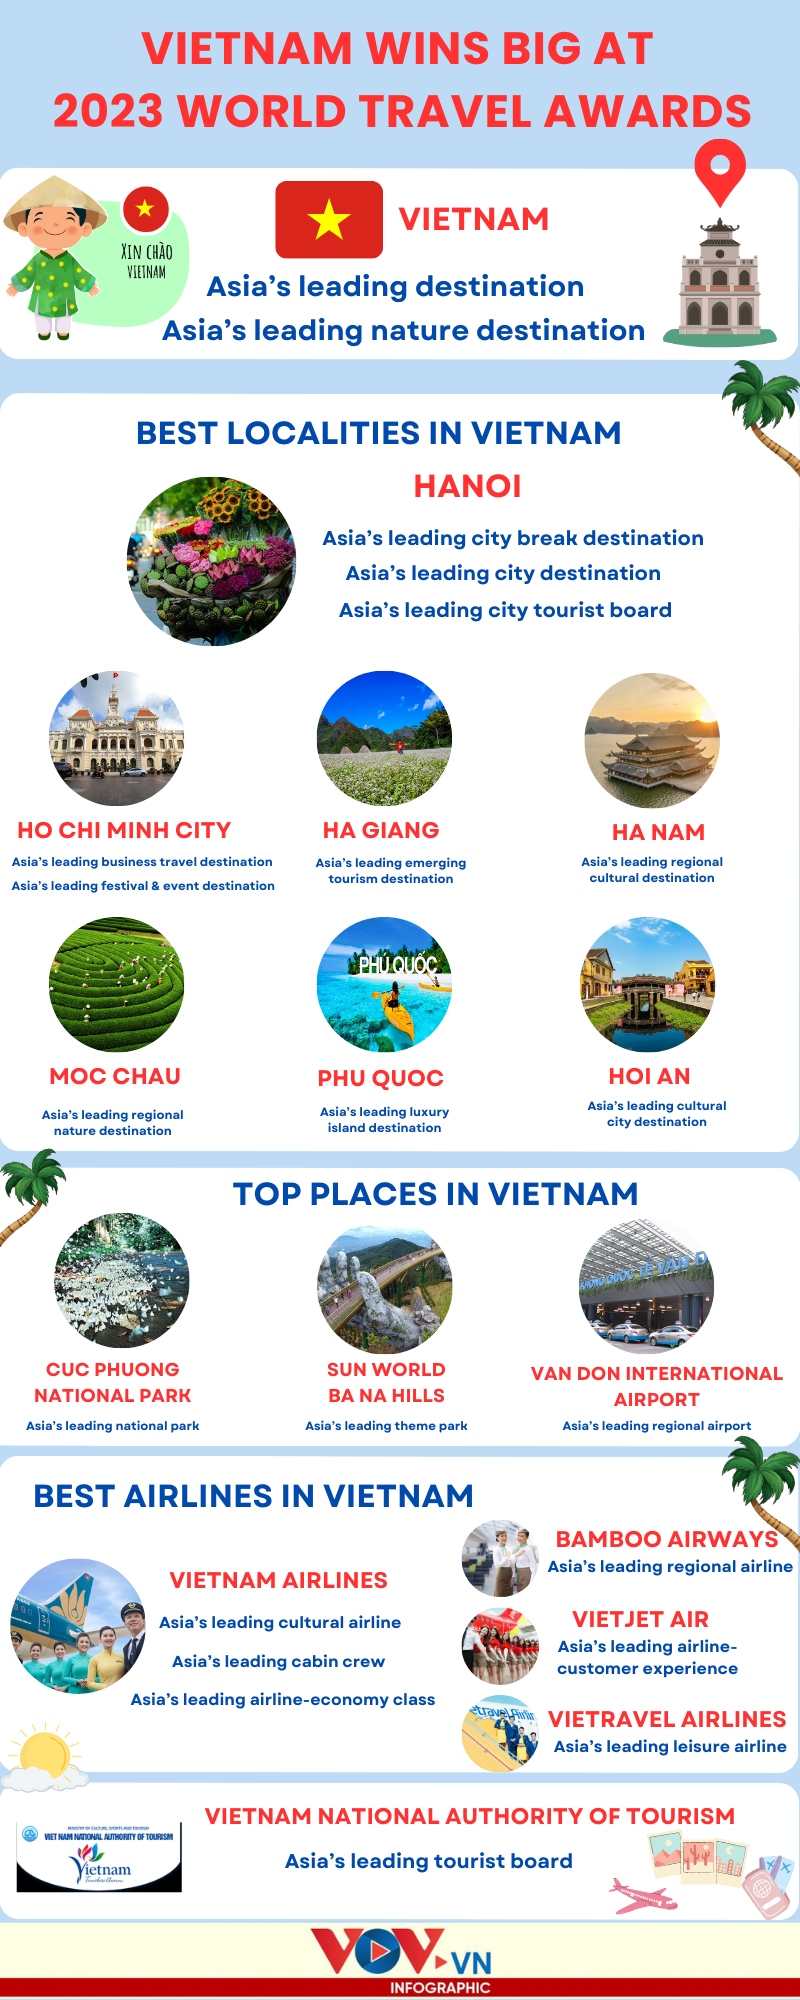 vietnam wins big at 2023 world travel awards picture 1